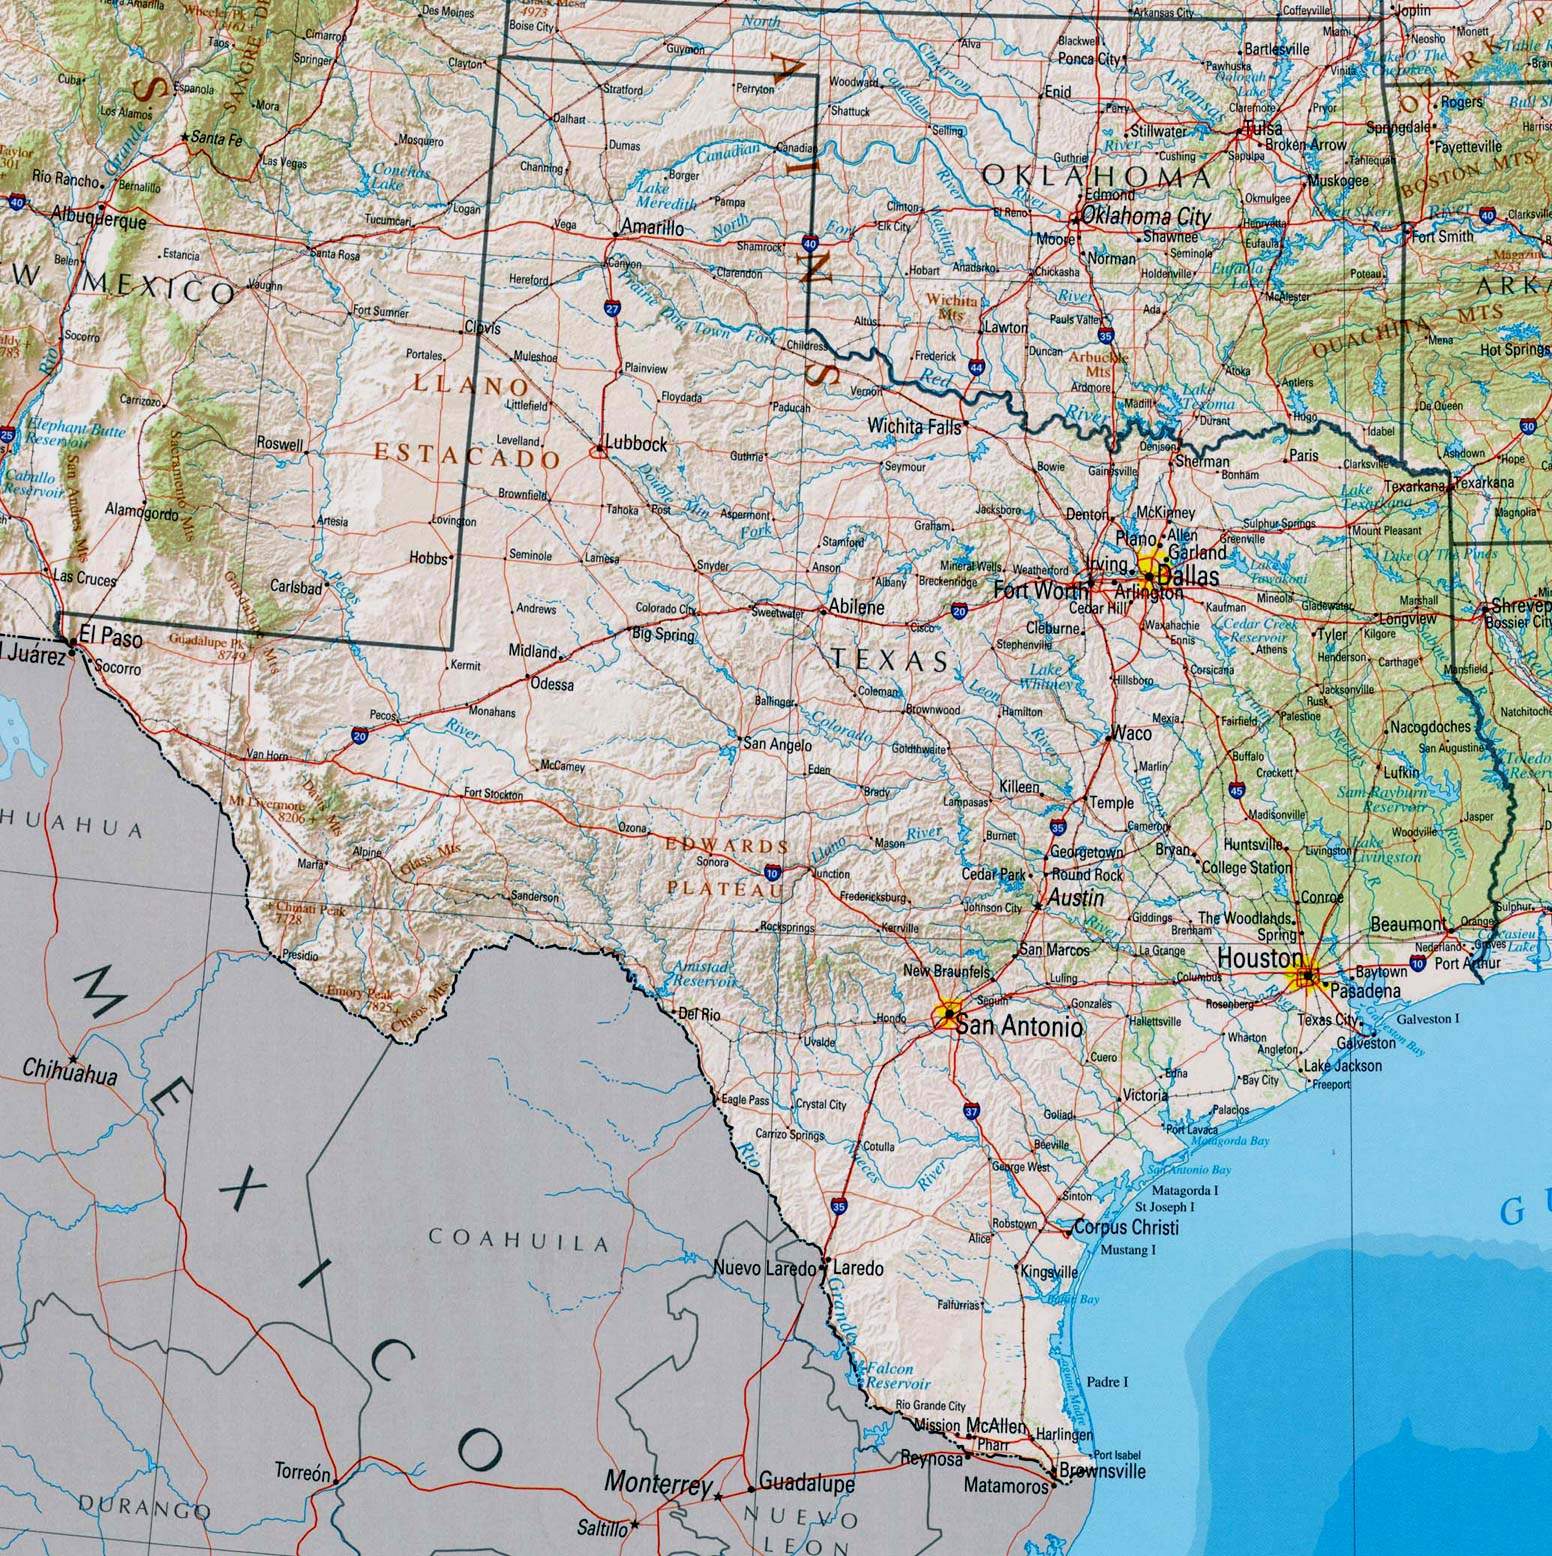 Large Texas Maps For Free Download And Print High Resolution And Detailed Maps